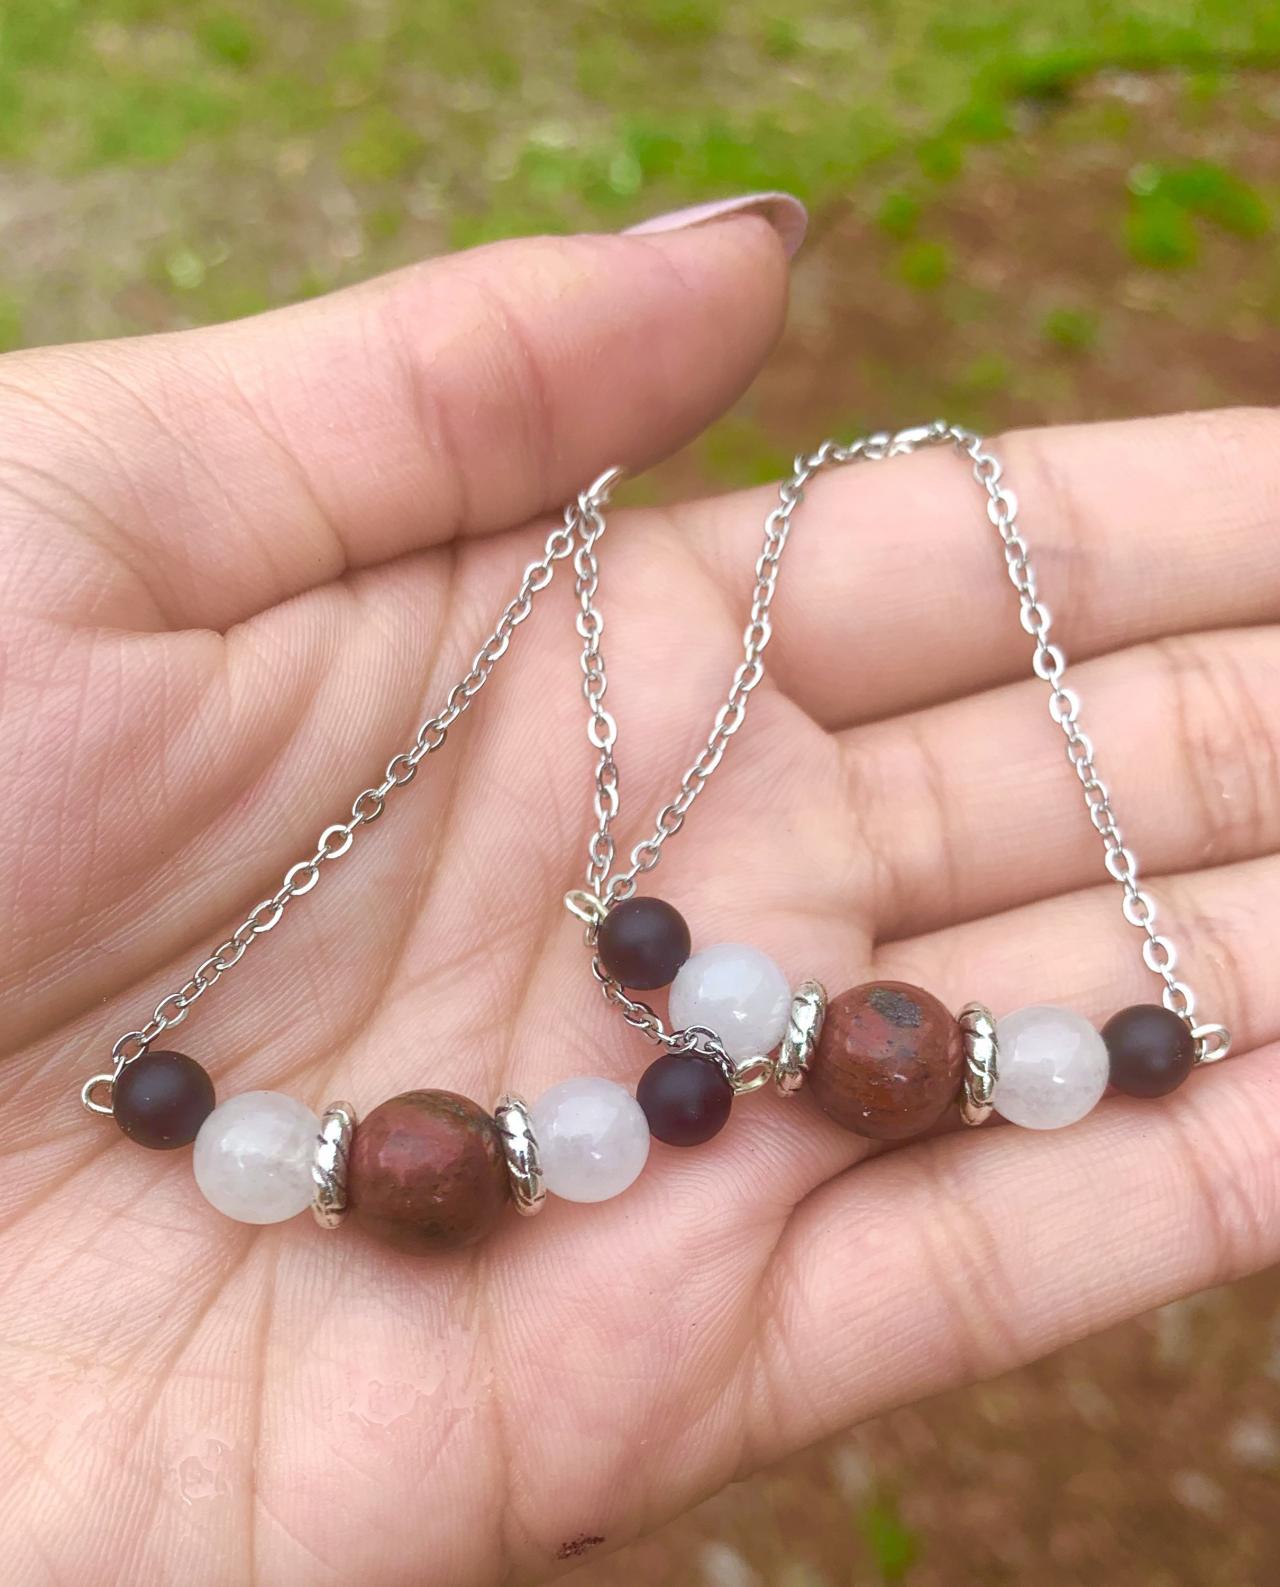 Red Speckled Jasper, White Agate, And Onxy Chain Dangle Earrings For Women Made With Genuine Crystals Metaphysical Handmade In The Us